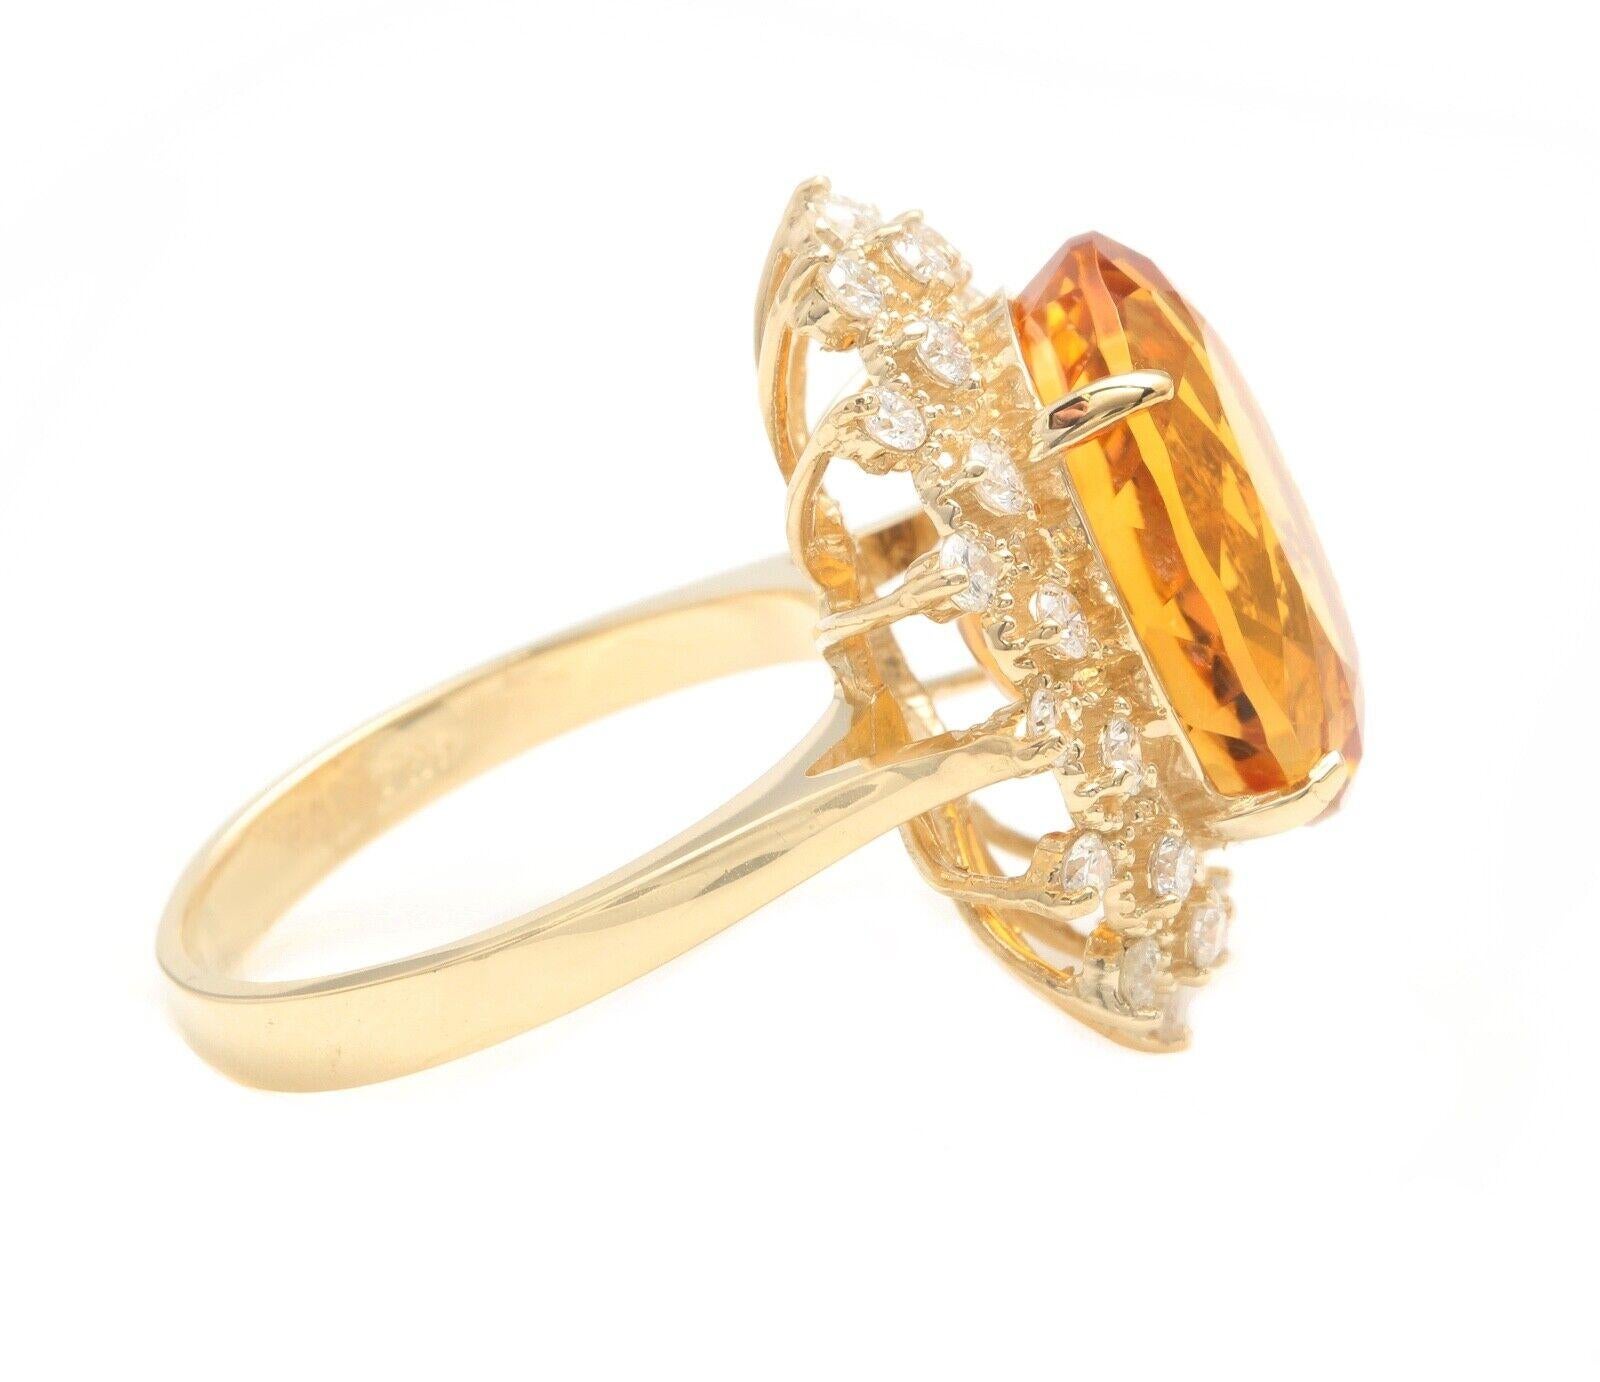 Mixed Cut 9.75Ct Natural Citrine and Diamond 14K Solid Yellow Gold Ring For Sale